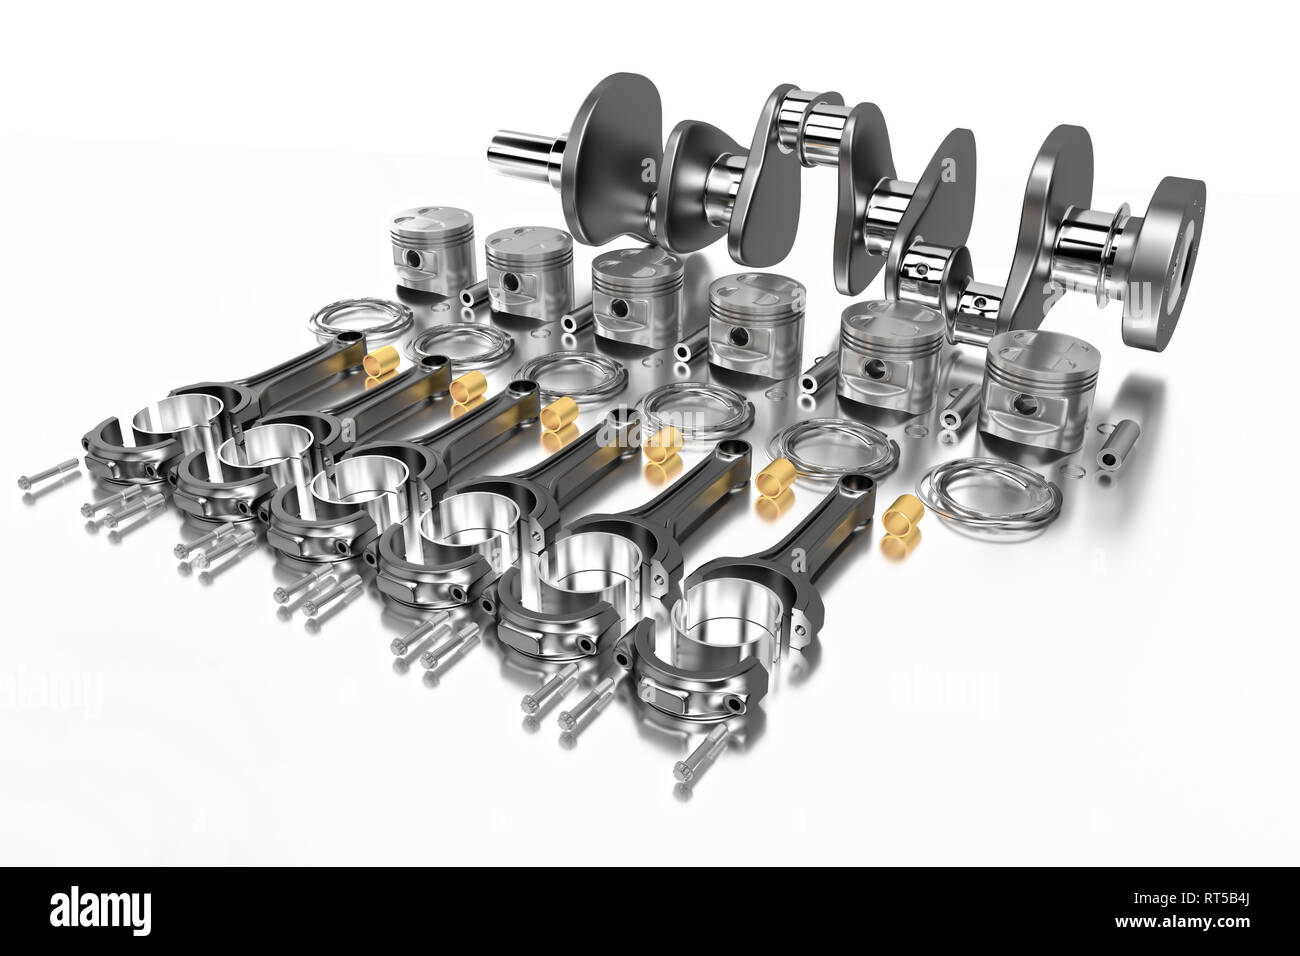 3D rendering. Engine bearing crankshaft with pistons and piston rings. Stock Photo